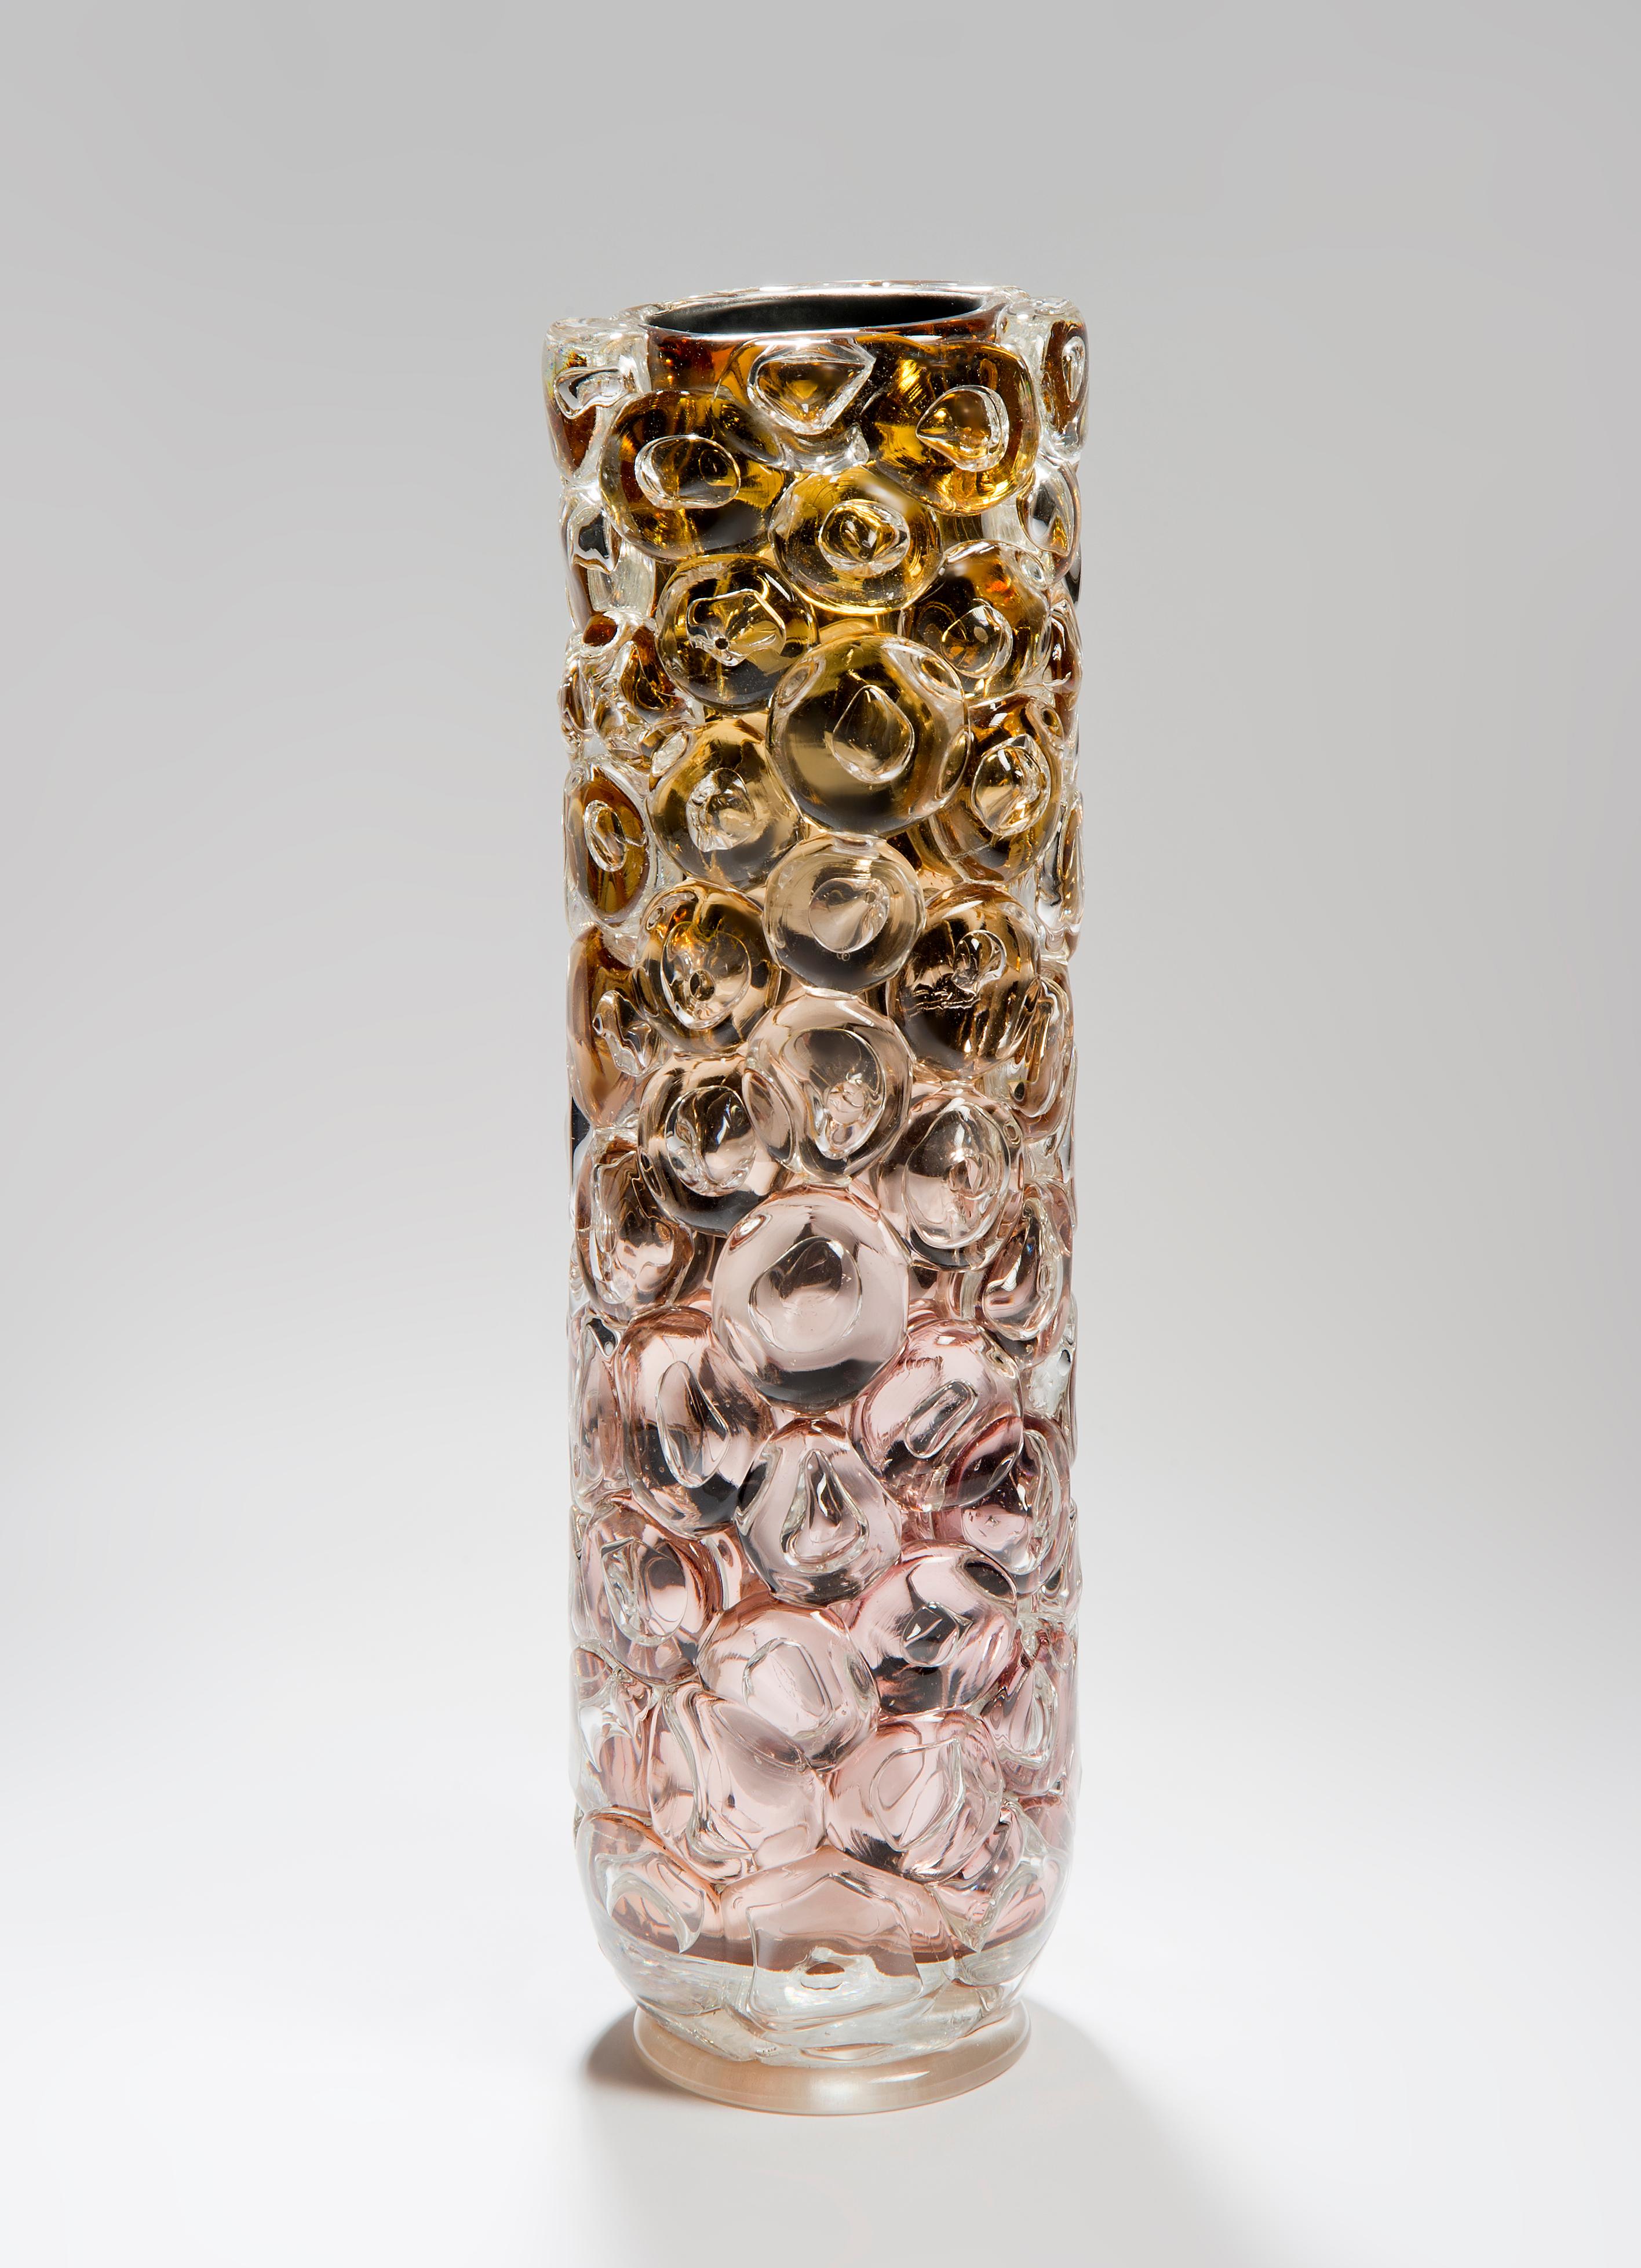 Art Glass Bubblewrap in Gold, a Unique pink, gold & silver glass Vase by Allister Malcolm